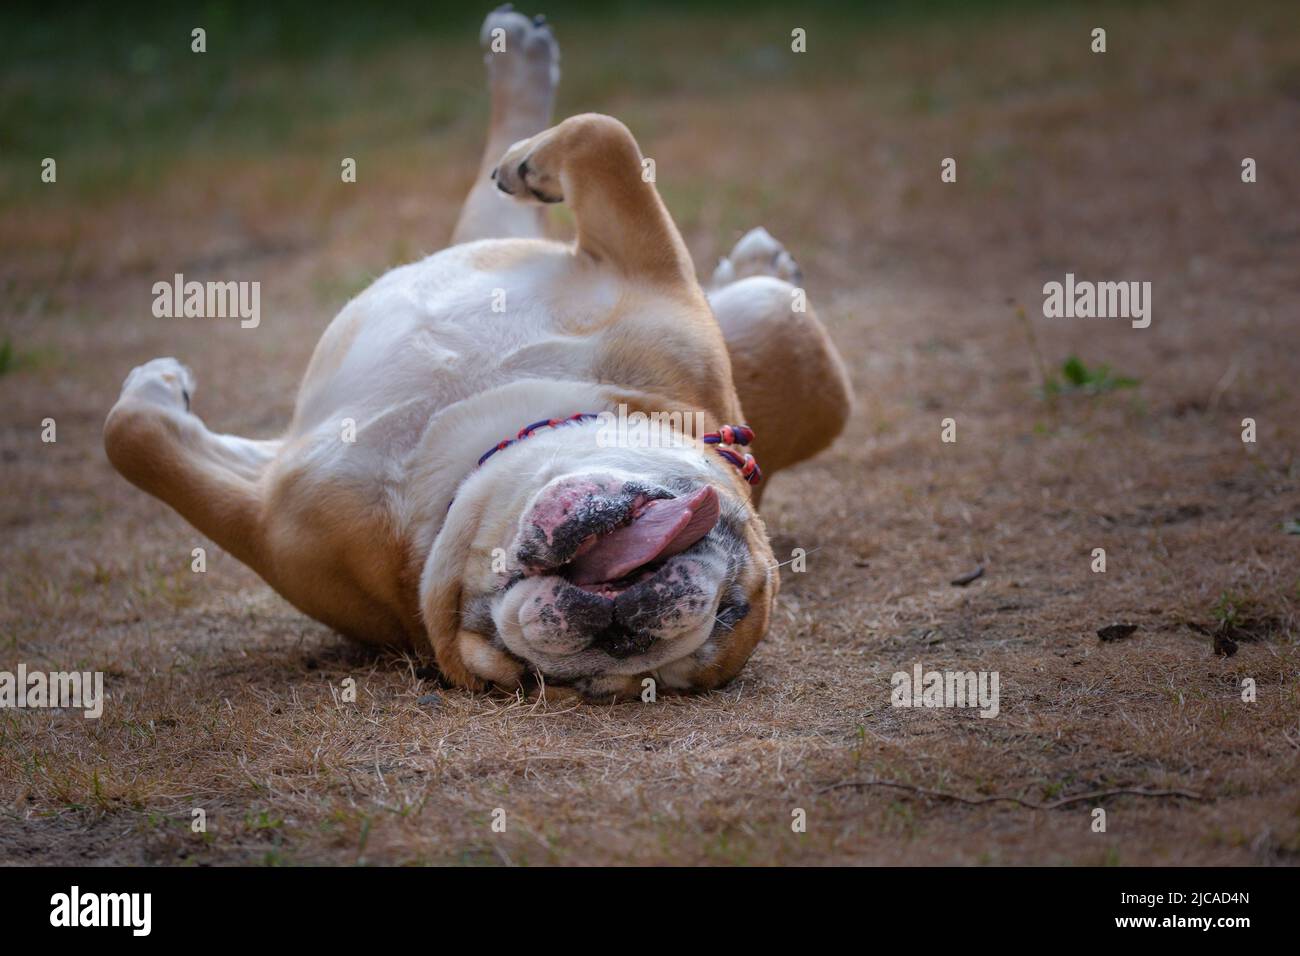 Funny bulldog rolling on the ground with tongue out appears to be laughing Stock Photo